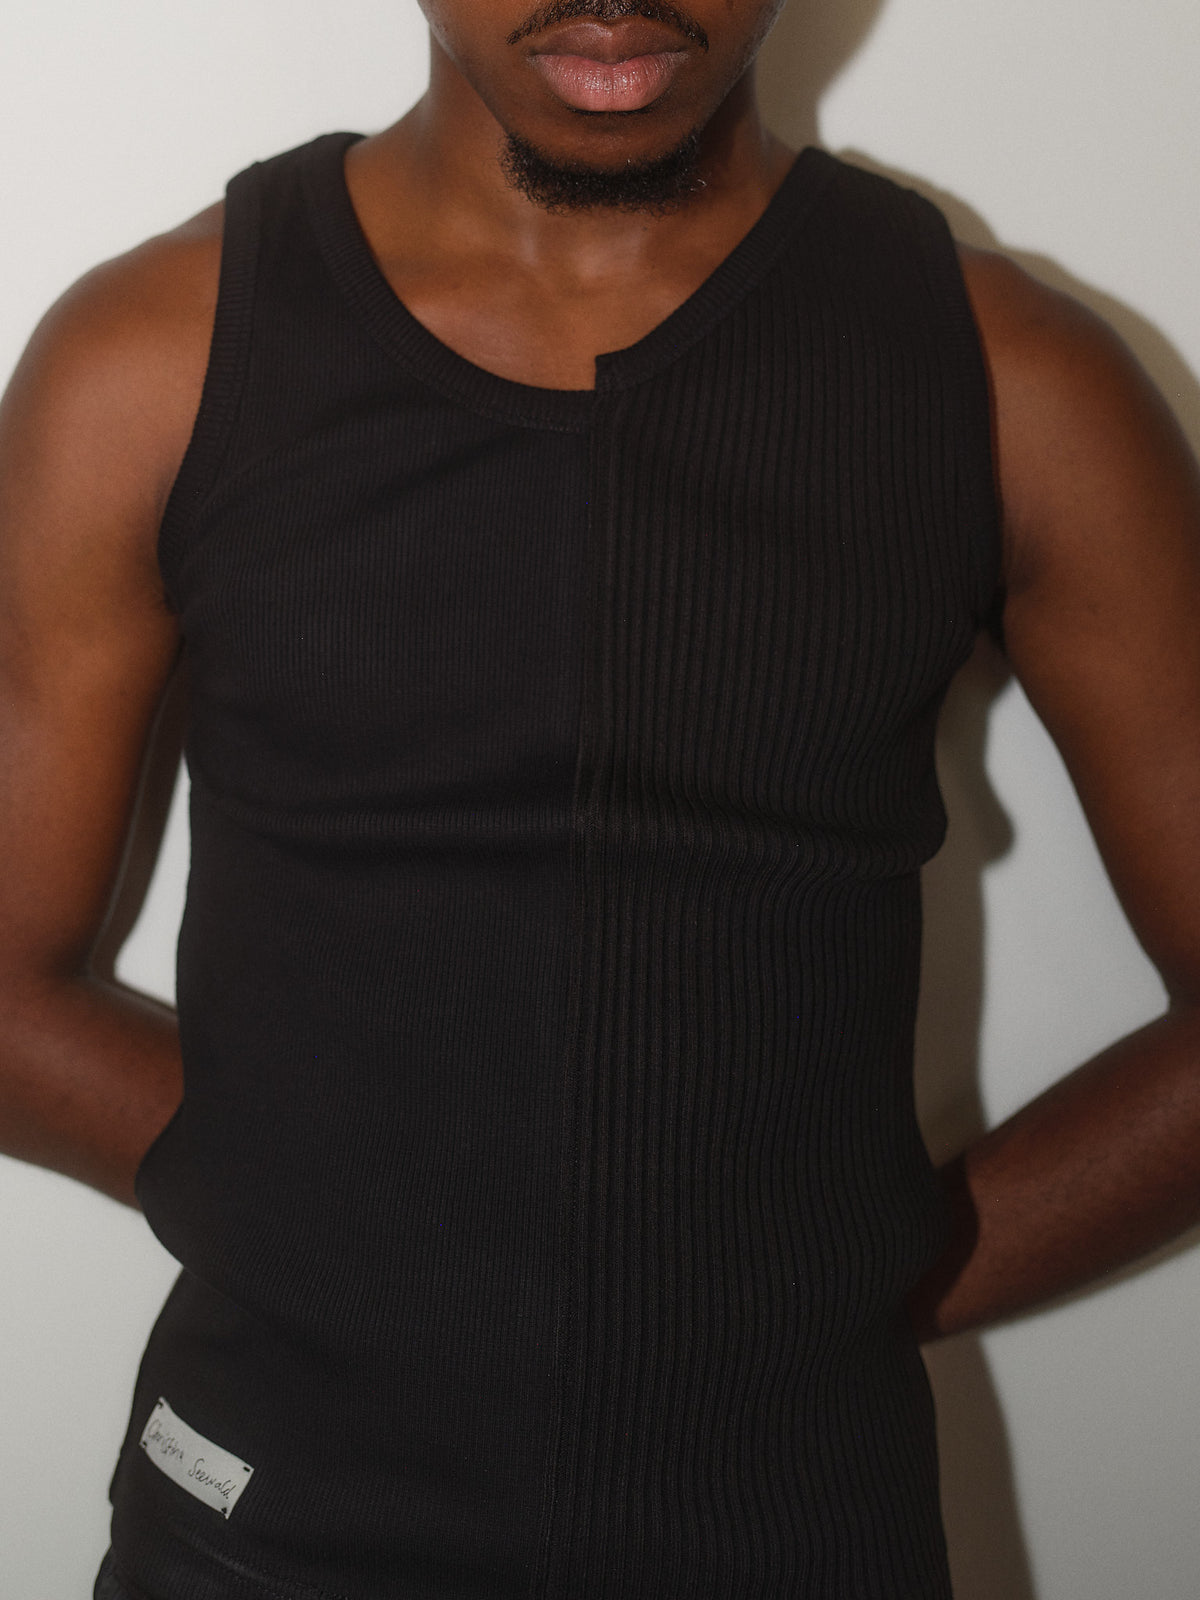 Cotton Jersey Tank Top designed by Christina Seewald.Sustainable, designed and made in Europe.